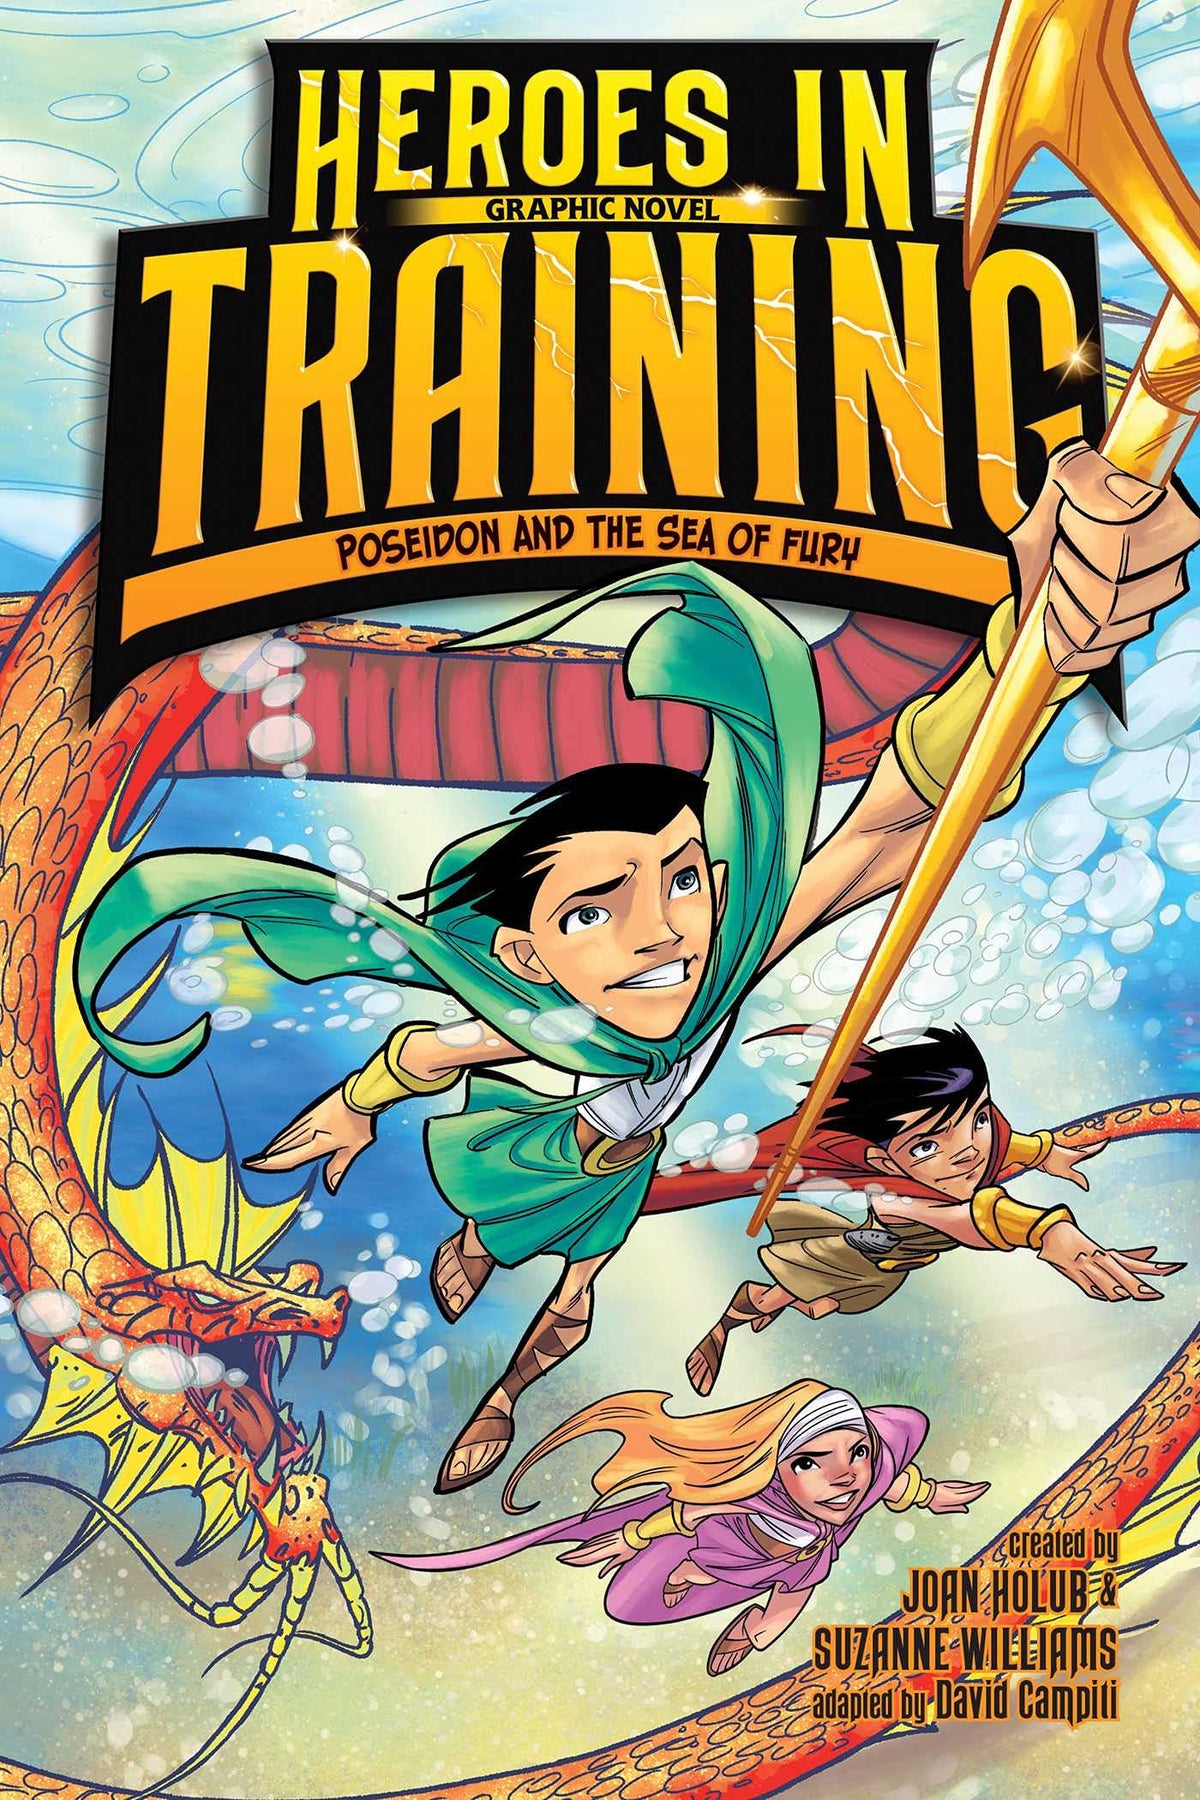 Heroes in Training #2 Poseidon and the Sea of Fury Cover